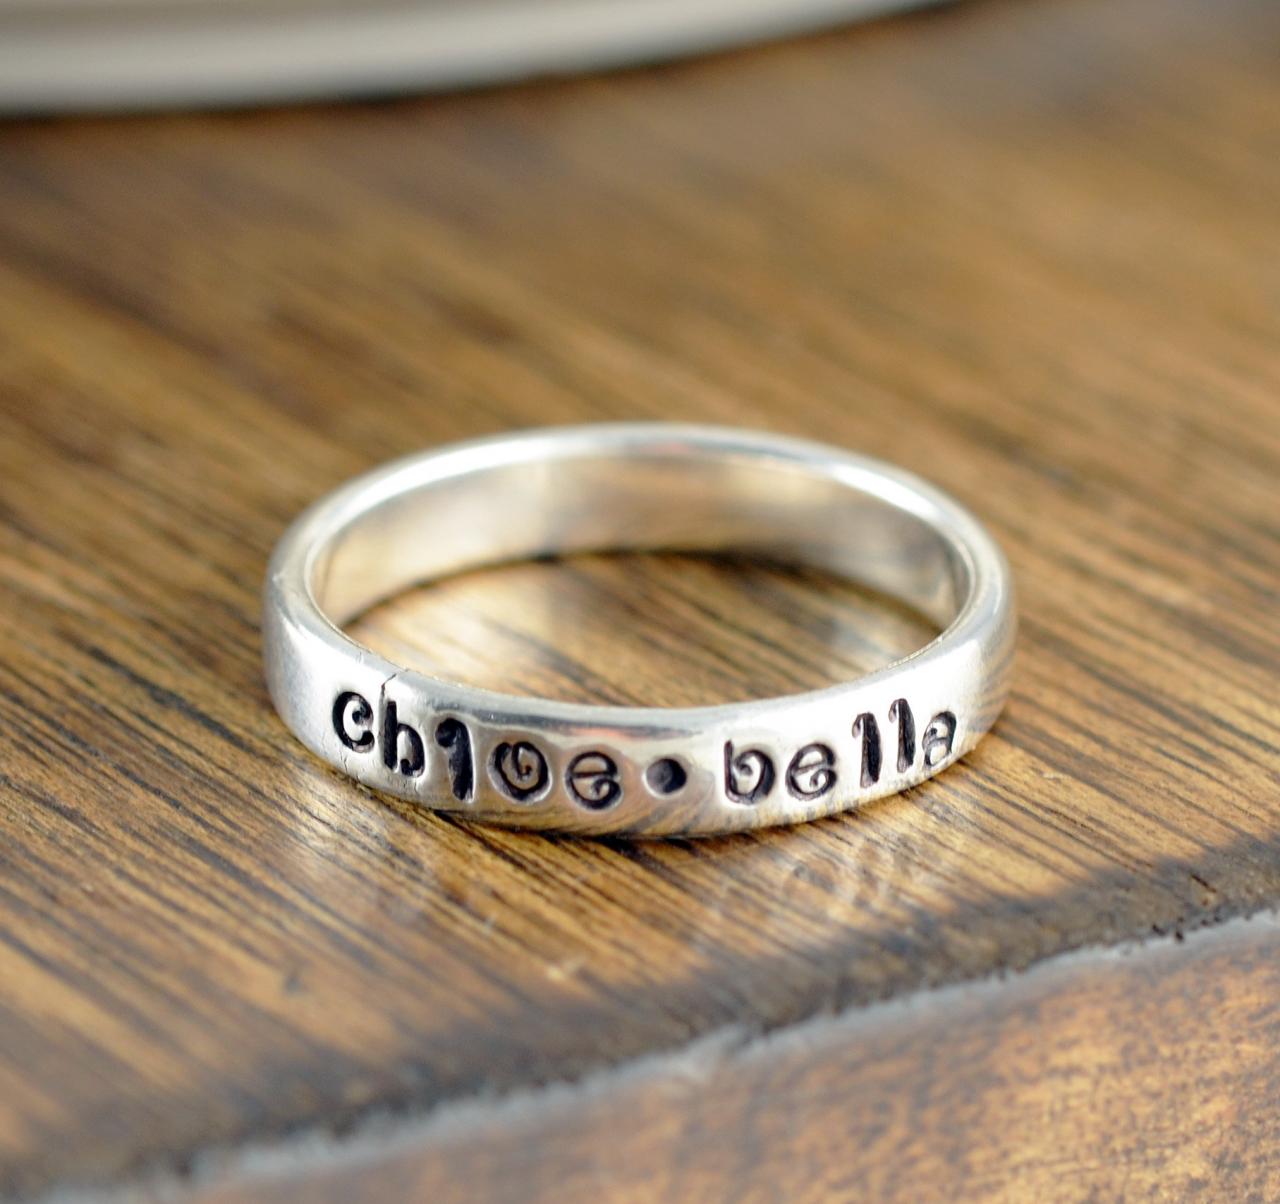 Mothers Ring - Stackable Name Rings - Gift for Mom - Name Rings - Personalized Stacking Ring - Mothers Jewelry - Mothers Ring